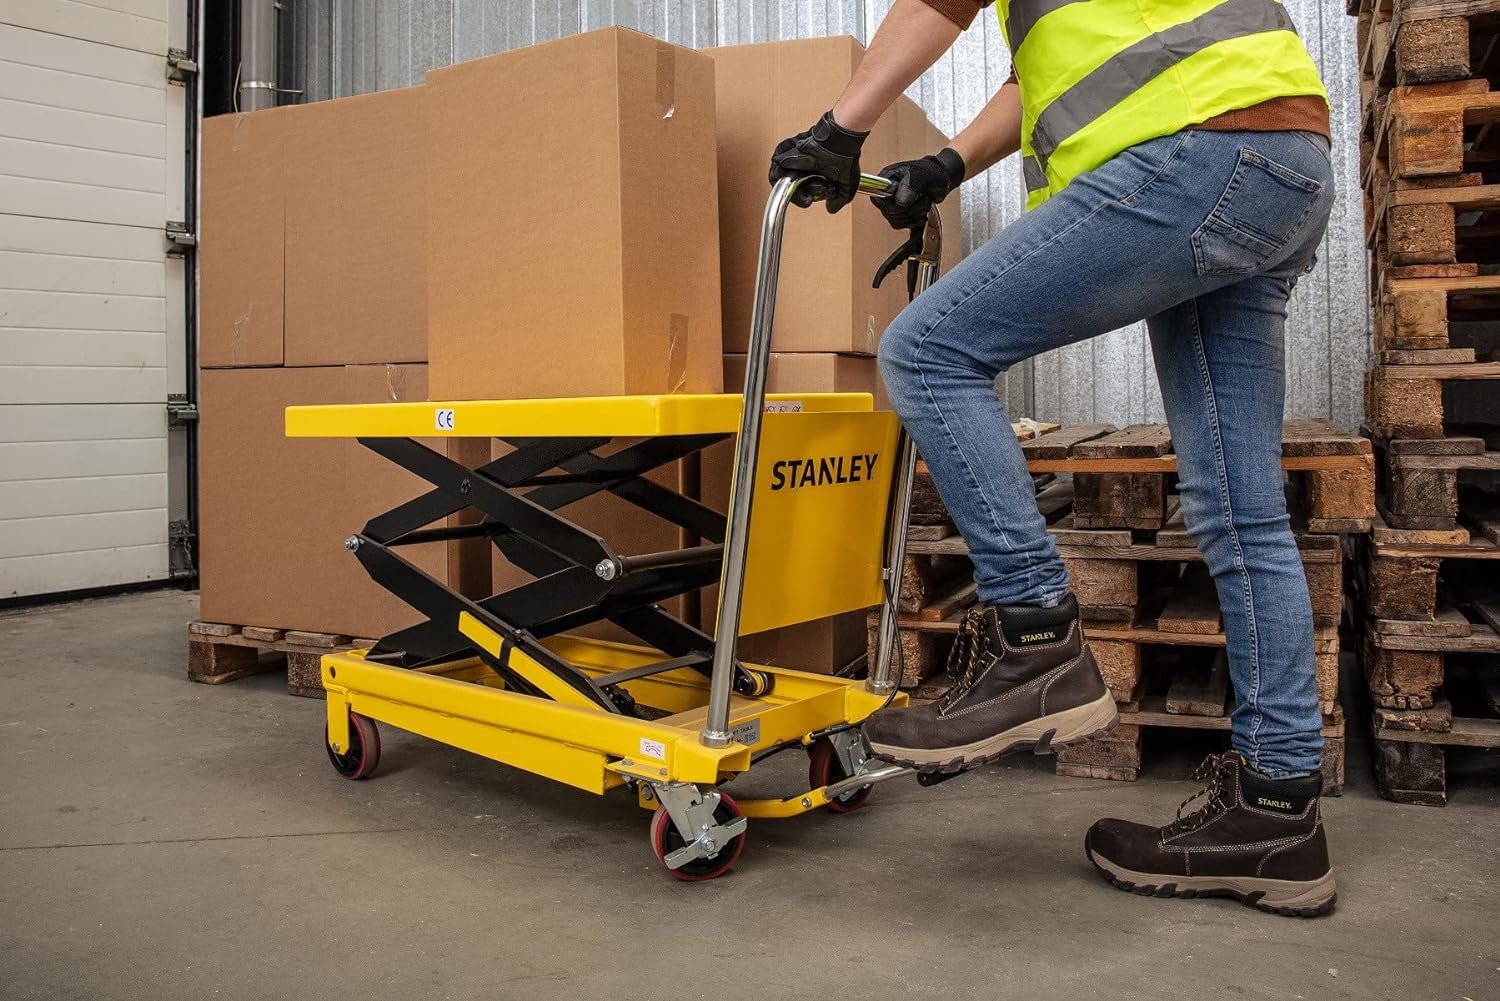 Stanley Hydraulic Scissor Lift Table 800Kg With 1.5m Lift Height SWXTI-CTABL-XX800